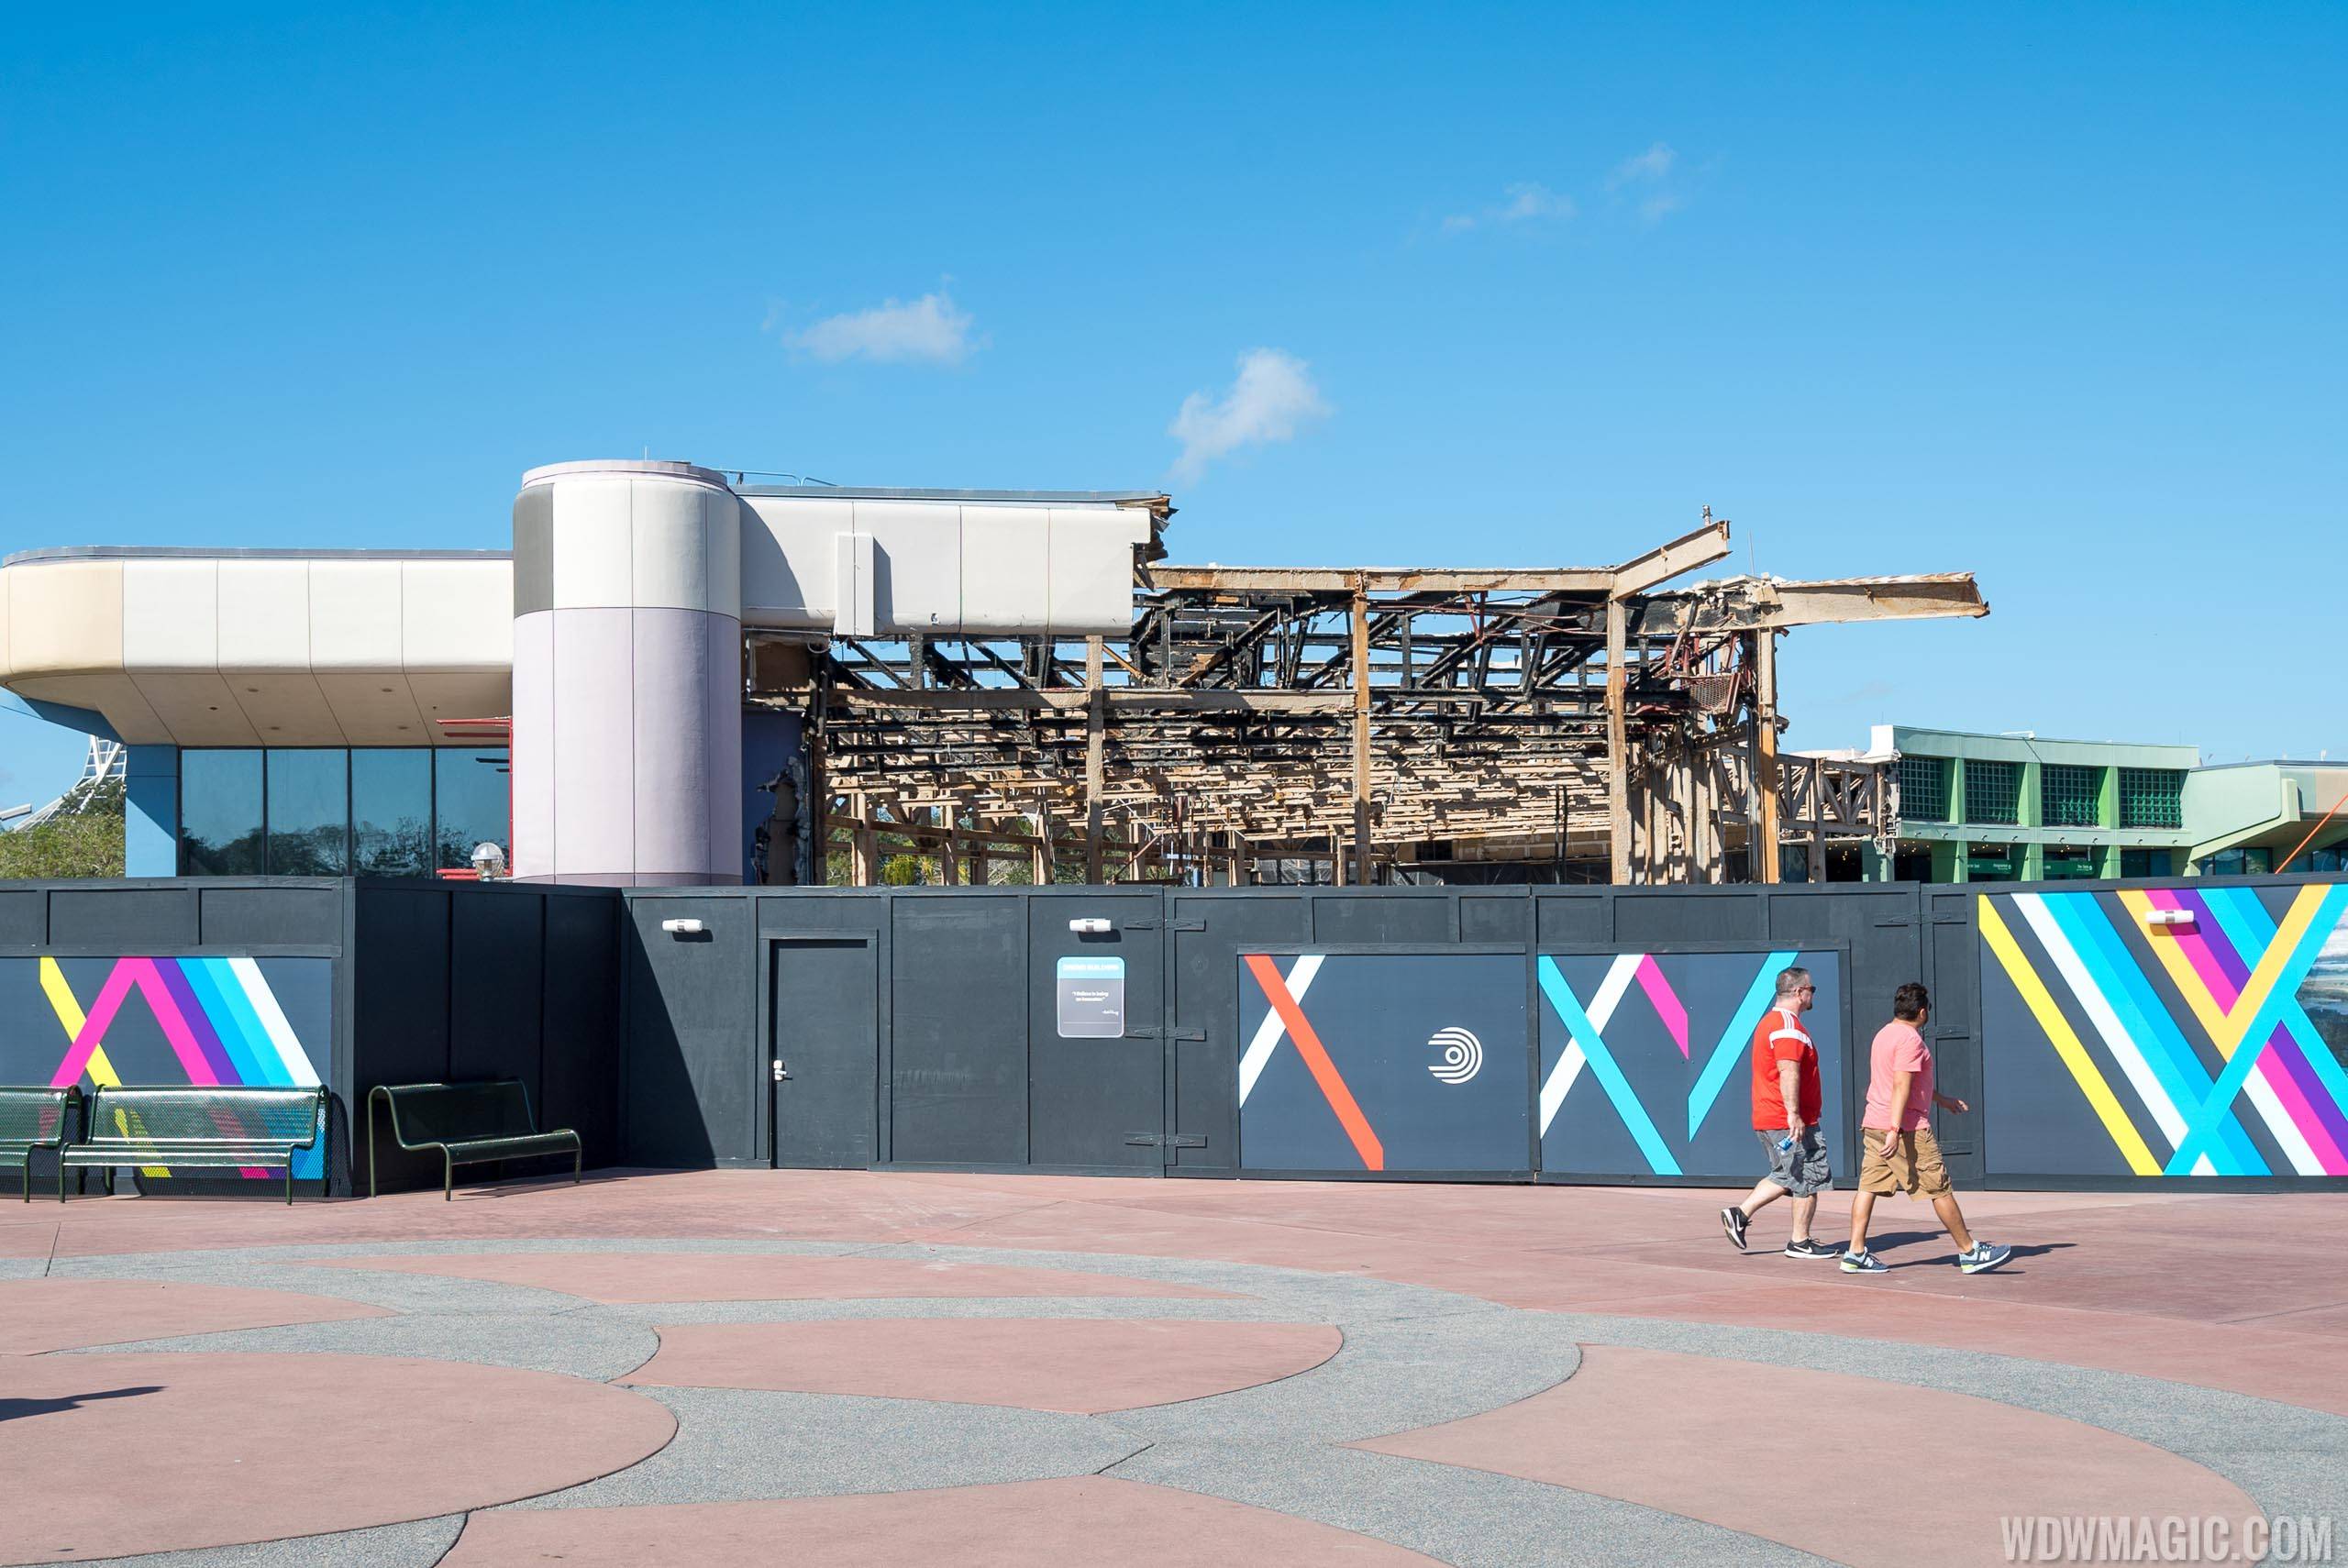 PHOTOS - Latest look at the Innoventions West demolition